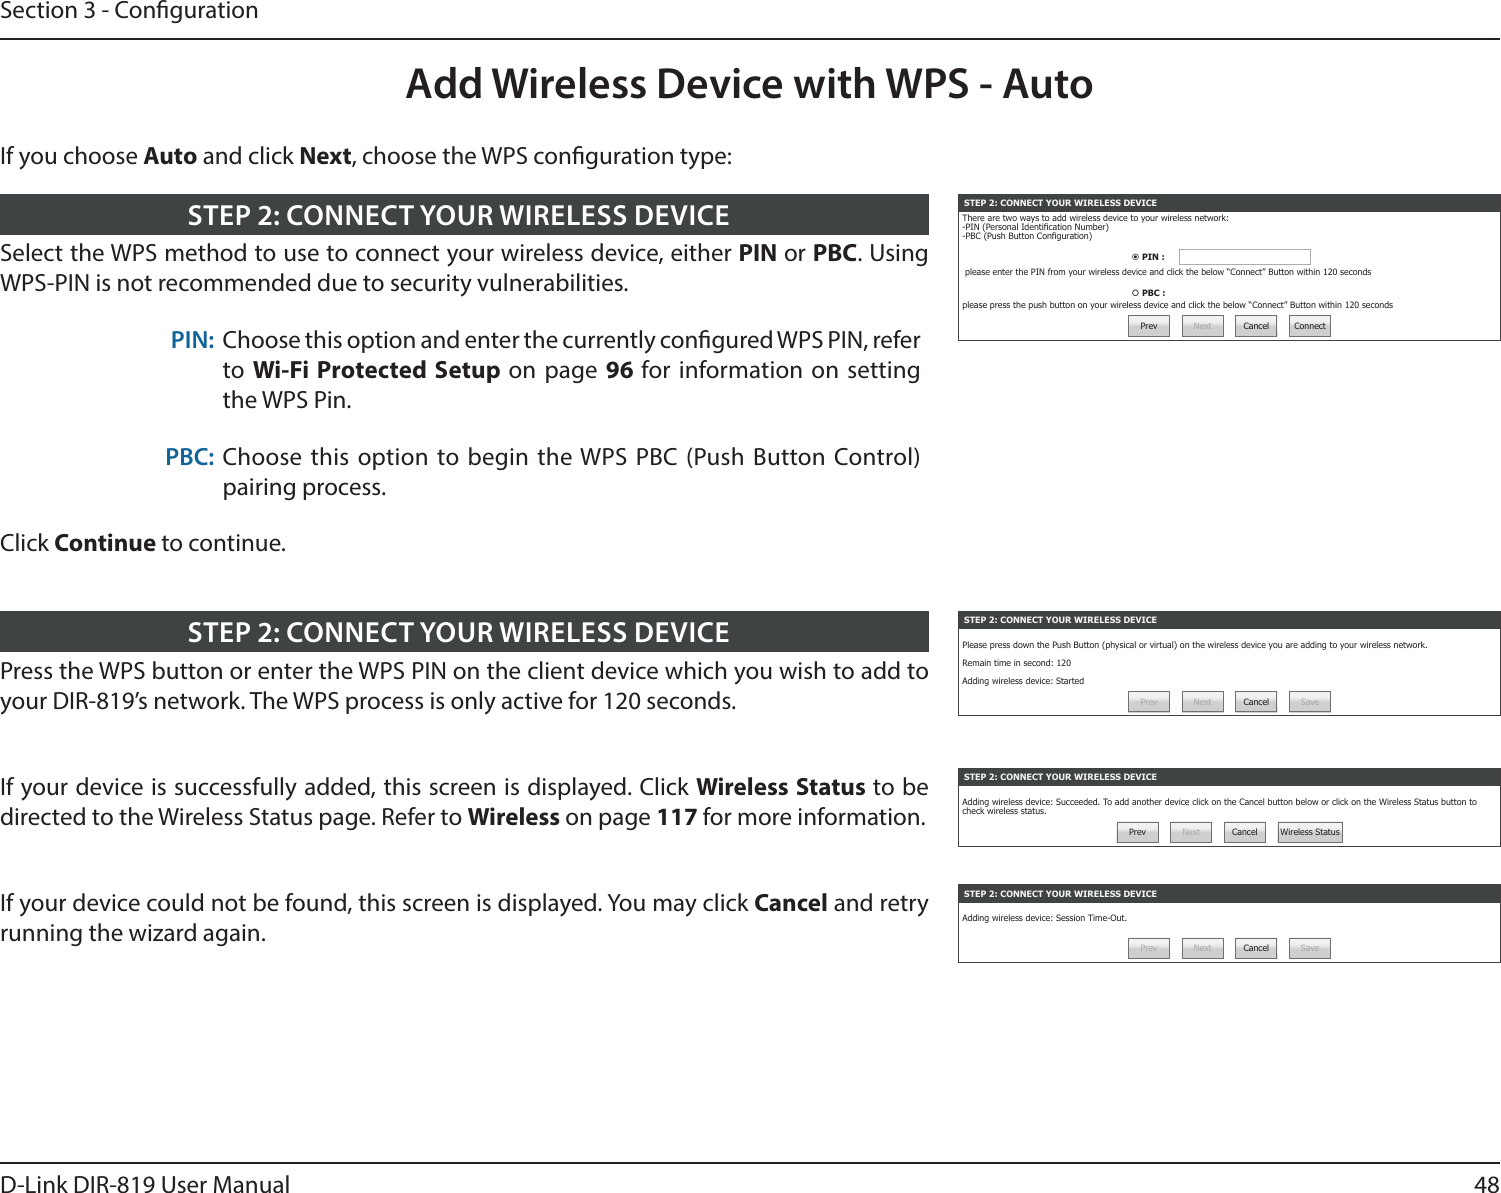 48D-Link DIR-819 User ManualSection 3 - CongurationAdd Wireless Device with WPS - AutoSTEP 2: CONNECT YOUR WIRELESS DEVICEThere are two ways to add wireless device to your wireless network:-PIN (Personal Identication Number)-PBC (Push Button Conguration) PIN :  please enter the PIN from your wireless device and click the below “Connect” Button within 120 seconds PBC : please press the push button on your wireless device and click the below “Connect” Button within 120 secondsPrev Next Cancel ConnectSelect the WPS method to use to connect your wireless device, either PIN or PBC. Using WPS-PIN is not recommended due to security vulnerabilities.PIN: Choose this option and enter the currently congured WPS PIN, refer to Wi-Fi Protected Setup on page 96 for information on setting the WPS Pin.PBC: Choose this option to begin the WPS PBC (Push Button Control)pairing process.Click Continue to continue.STEP 2: CONNECT YOUR WIRELESS DEVICESTEP 2: CONNECT YOUR WIRELESS DEVICEPlease press down the Push Button (physical or virtual) on the wireless device you are adding to your wireless network.Remain time in second: 120Adding wireless device: StartedPrev Next Cancel SavePress the WPS button or enter the WPS PIN on the client device which you wish to add to your DIR-819’s network. The WPS process is only active for 120 seconds.STEP 2: CONNECT YOUR WIRELESS DEVICESTEP 2: CONNECT YOUR WIRELESS DEVICEAdding wireless device: Session Time-Out.Prev Next Cancel SaveSTEP 2: CONNECT YOUR WIRELESS DEVICEAdding wireless device: Succeeded. To add another device click on the Cancel button below or click on the Wireless Status button to check wireless status.Prev Next Cancel Wireless StatusIf your device is successfully added, this screen is displayed. Click Wireless Status to be directed to the Wireless Status page. Refer to Wireless on page 117 for more information.If your device could not be found, this screen is displayed. You may click Cancel and retry running the wizard again.If you choose Auto and click Next, choose the WPS conguration type: